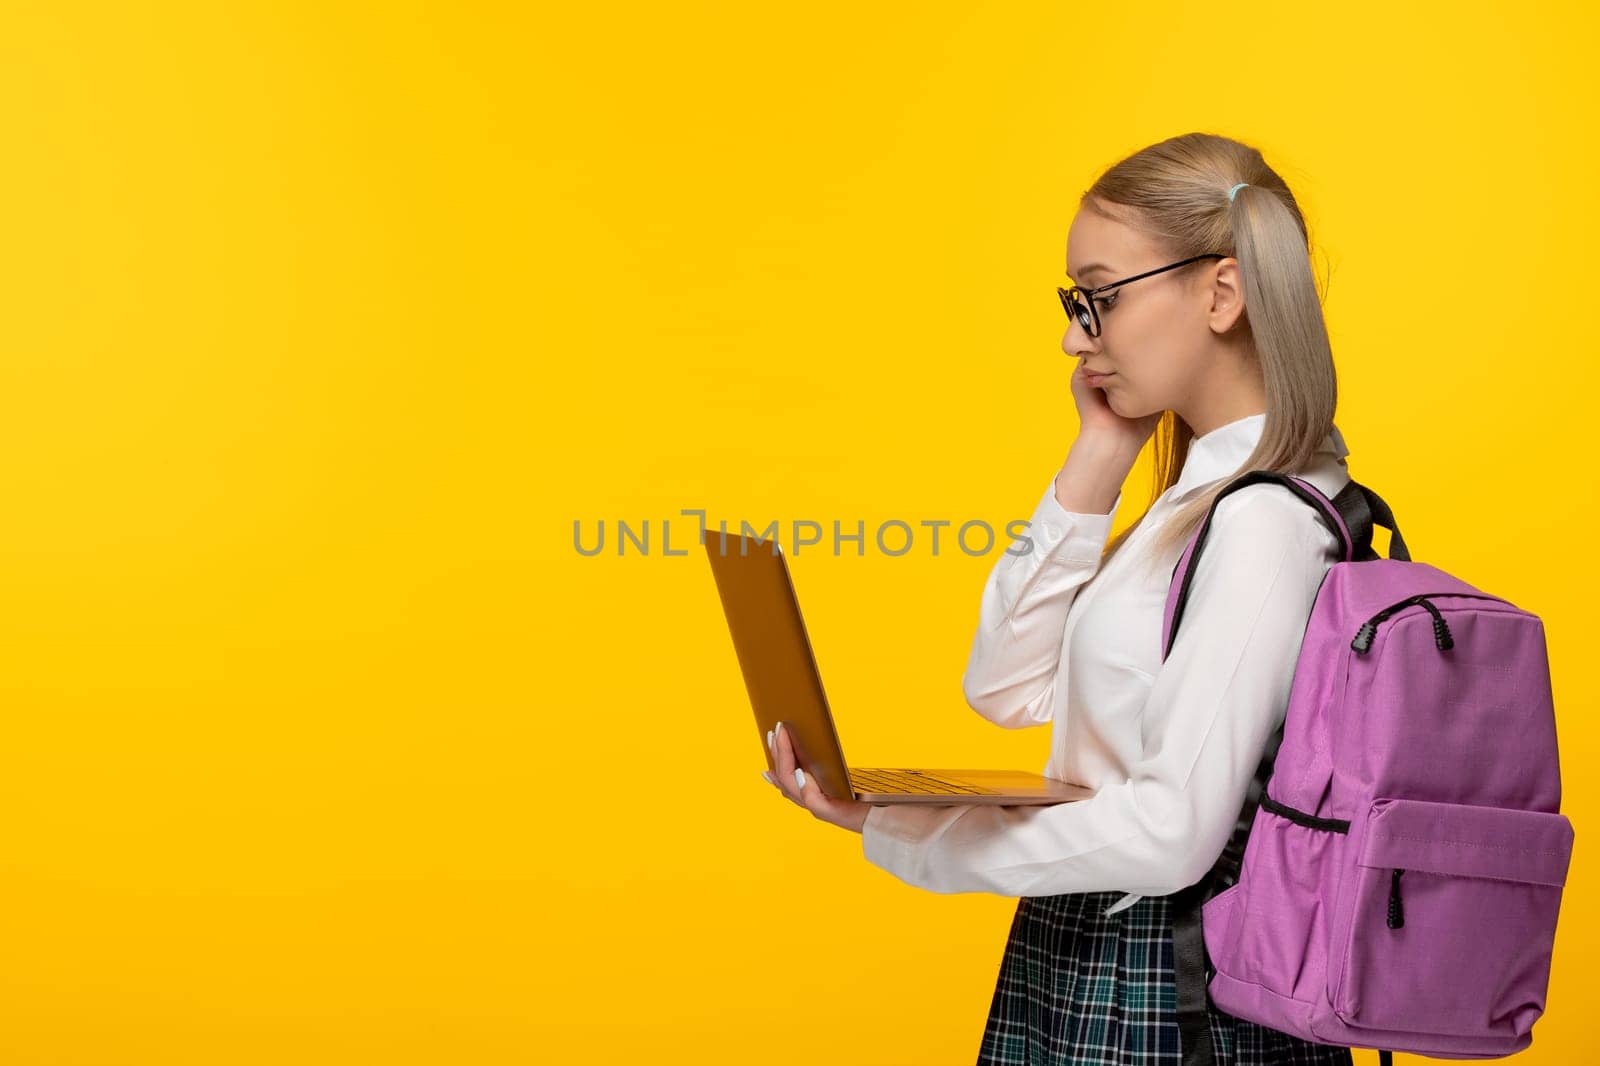 world book day blonde student with pony tails holding a computer by Kamran